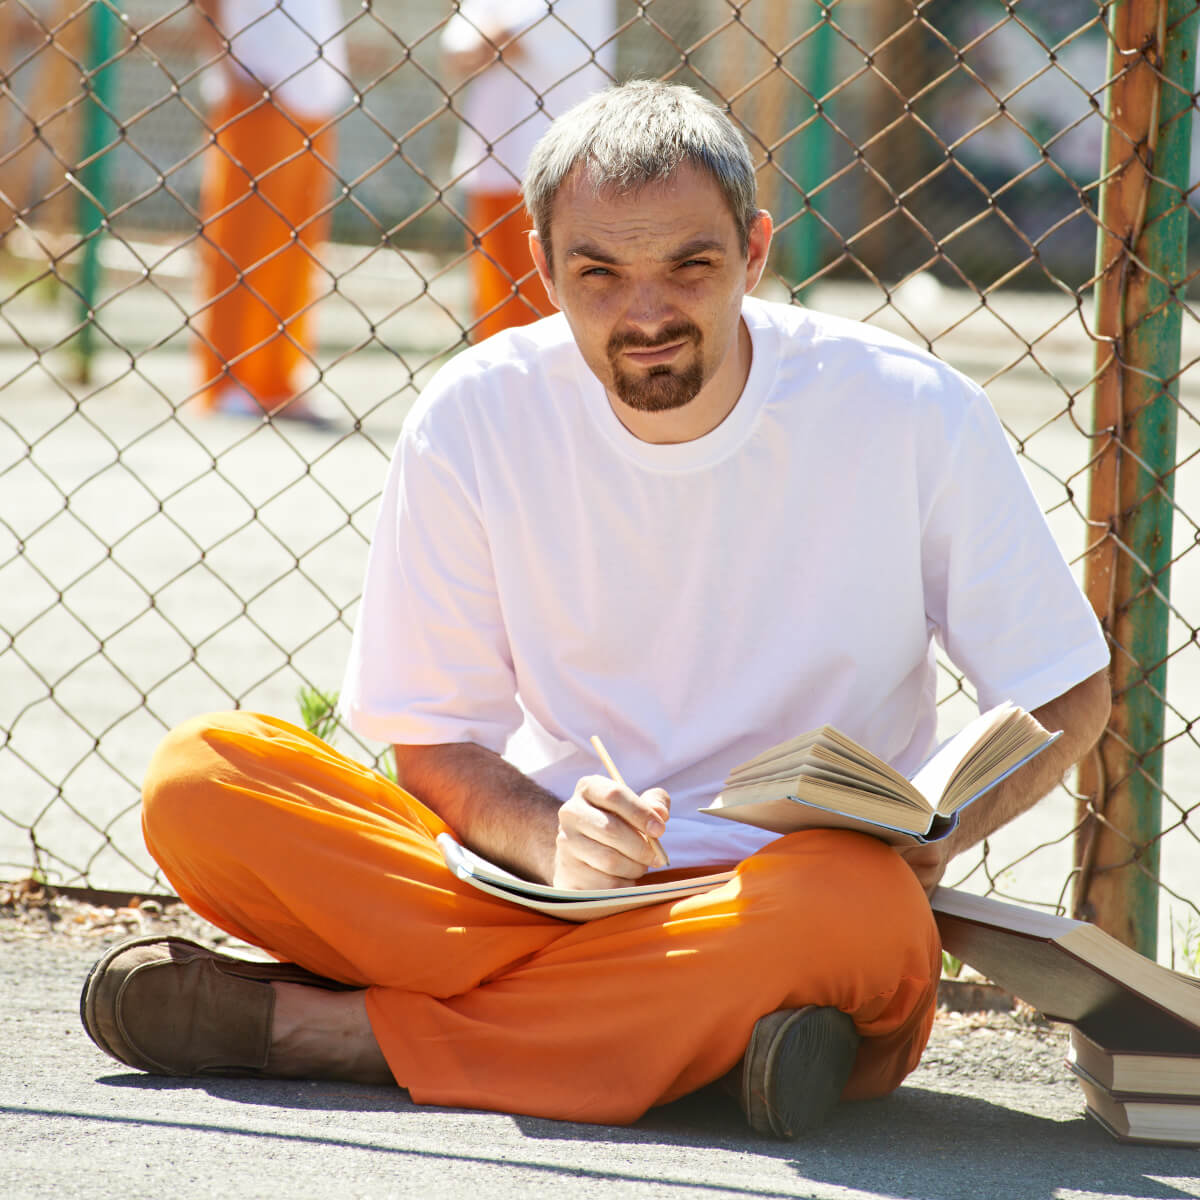 Prisoner sitting down and taking notes